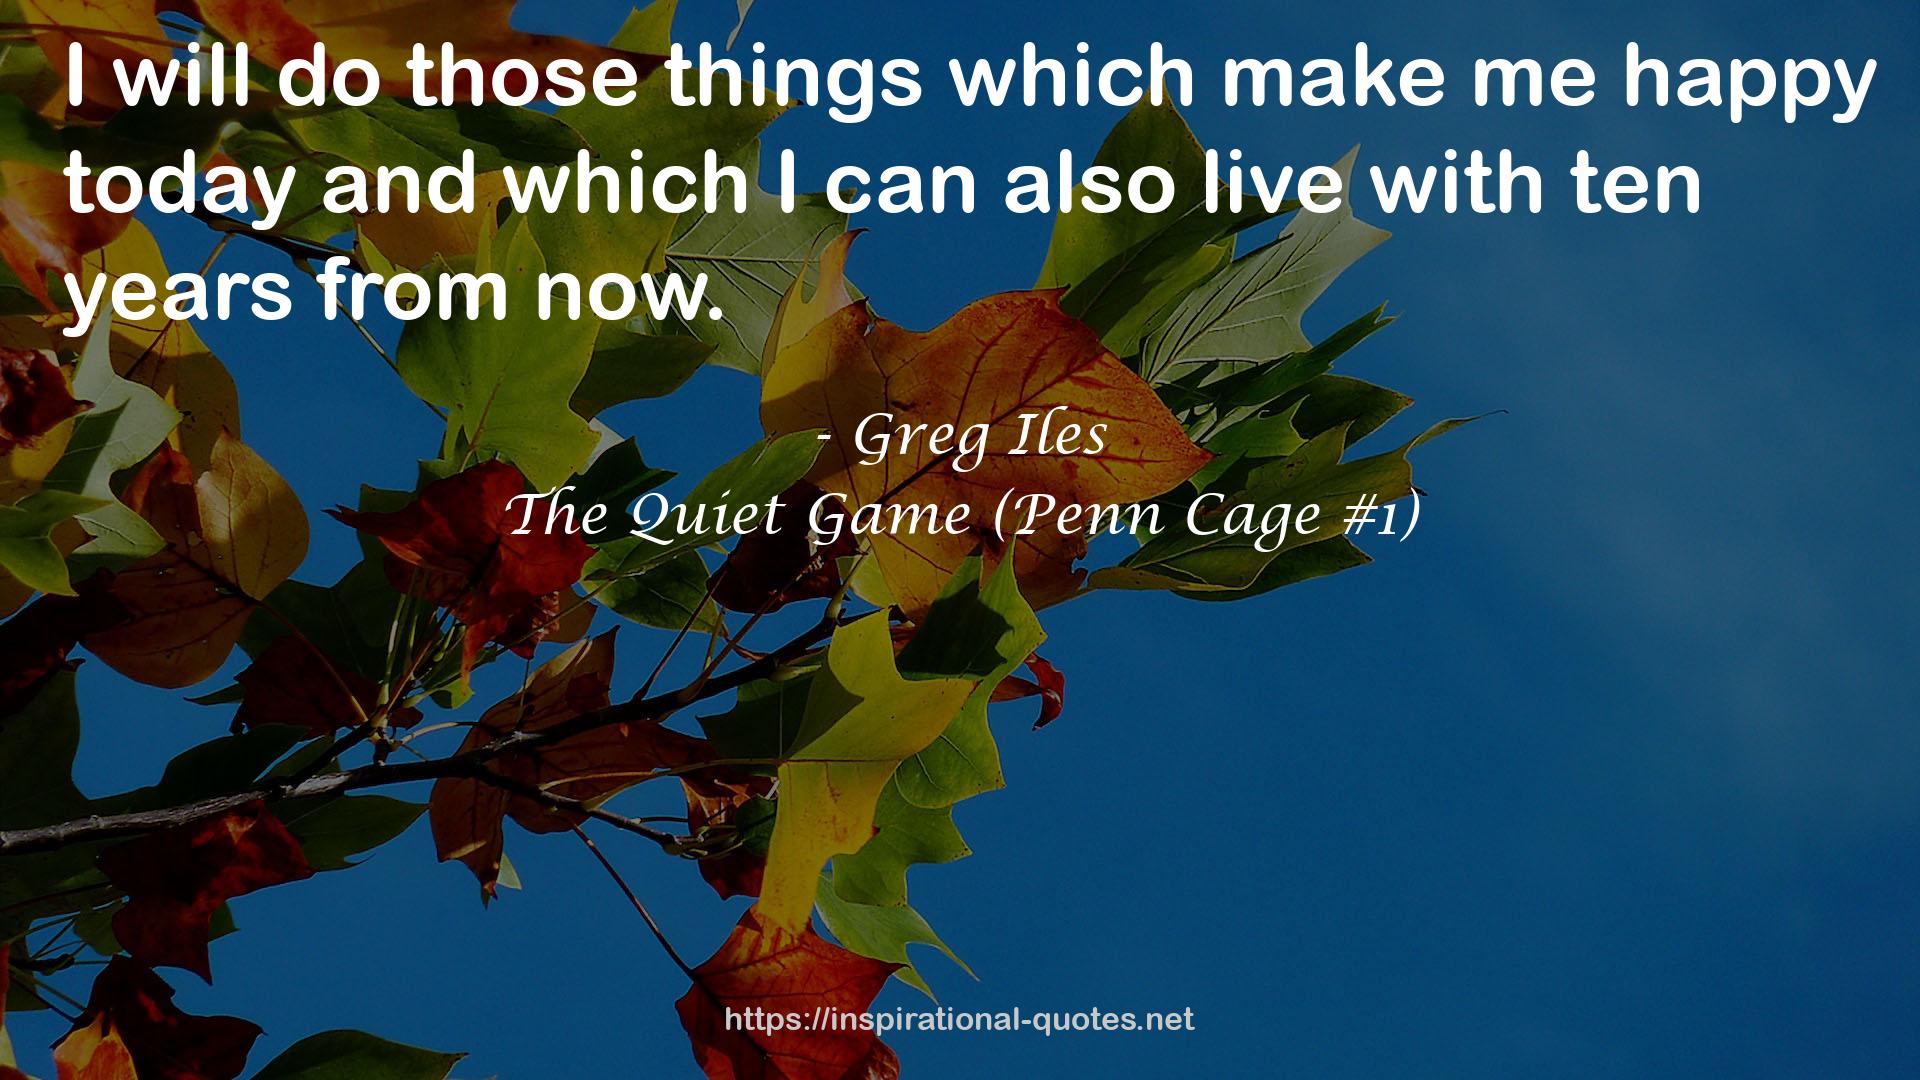 The Quiet Game (Penn Cage #1) QUOTES